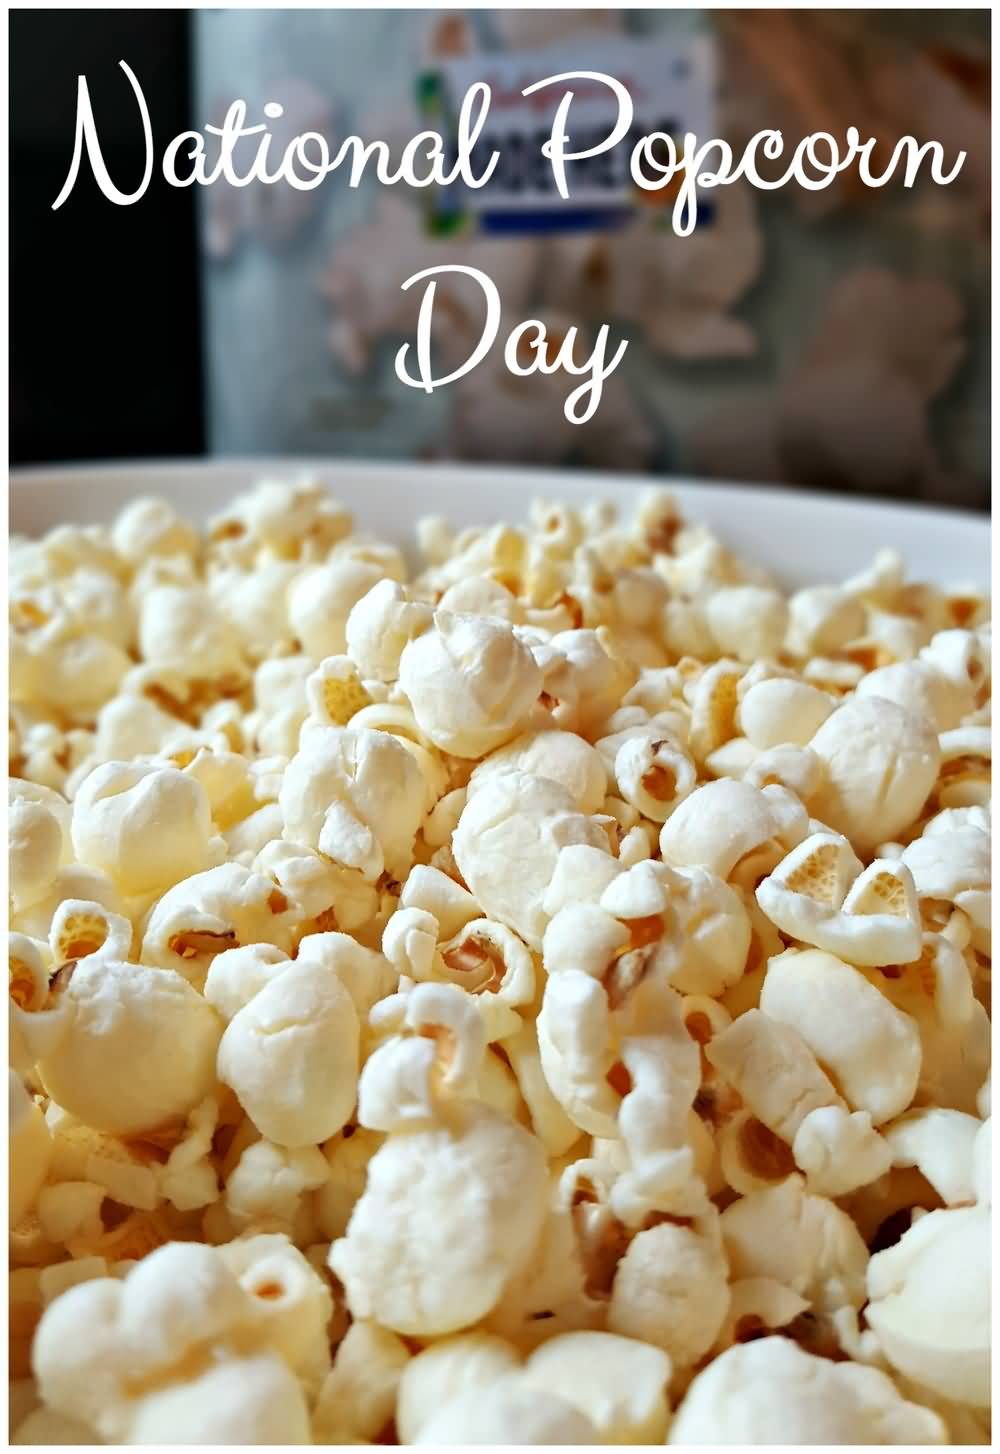 Happy National Popcorn Day To You